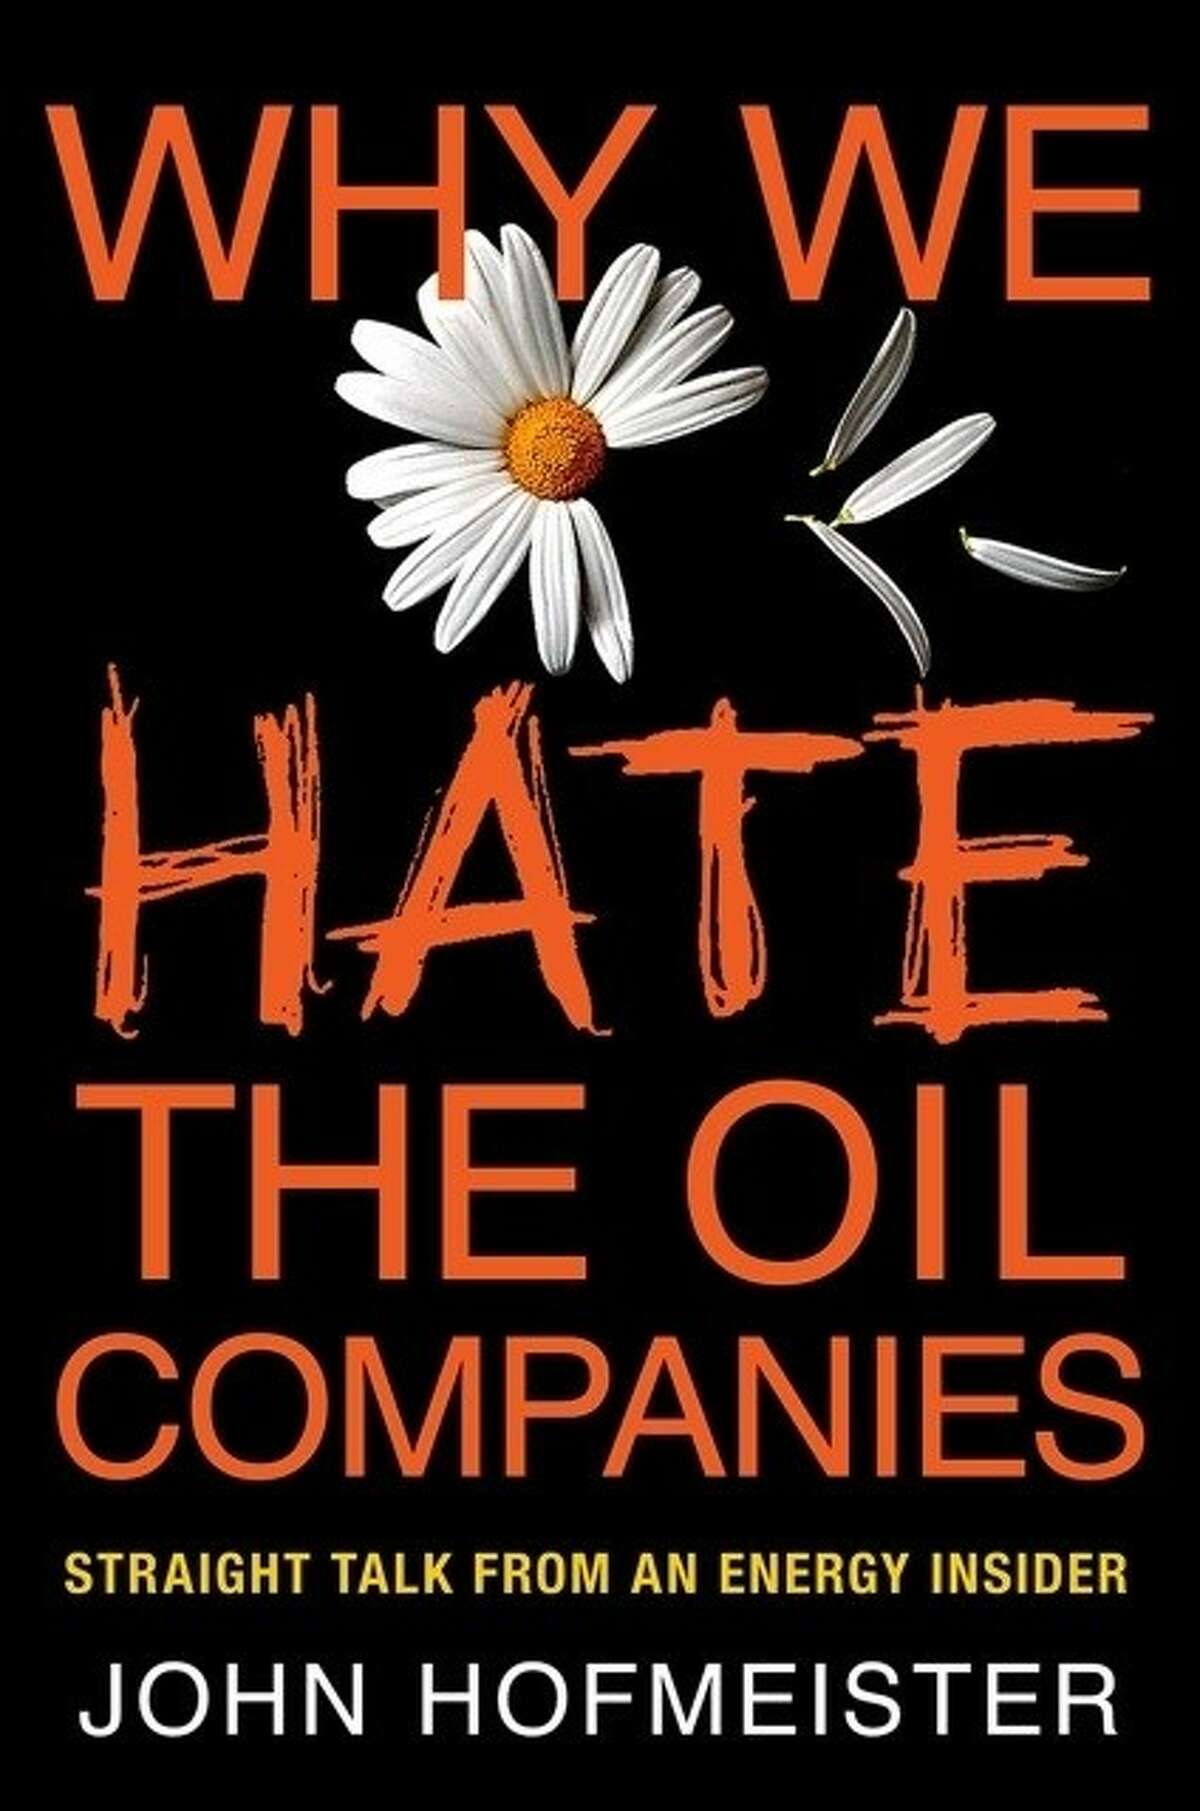 John Hofmeister, the former president of Shell Oil and author of the book “Why We Hate the Oil Companies: Straight Talk from an Energy Insider,” will speak at 7 p.m. on Monday, May 7 at the Pearland Westside Event Center.